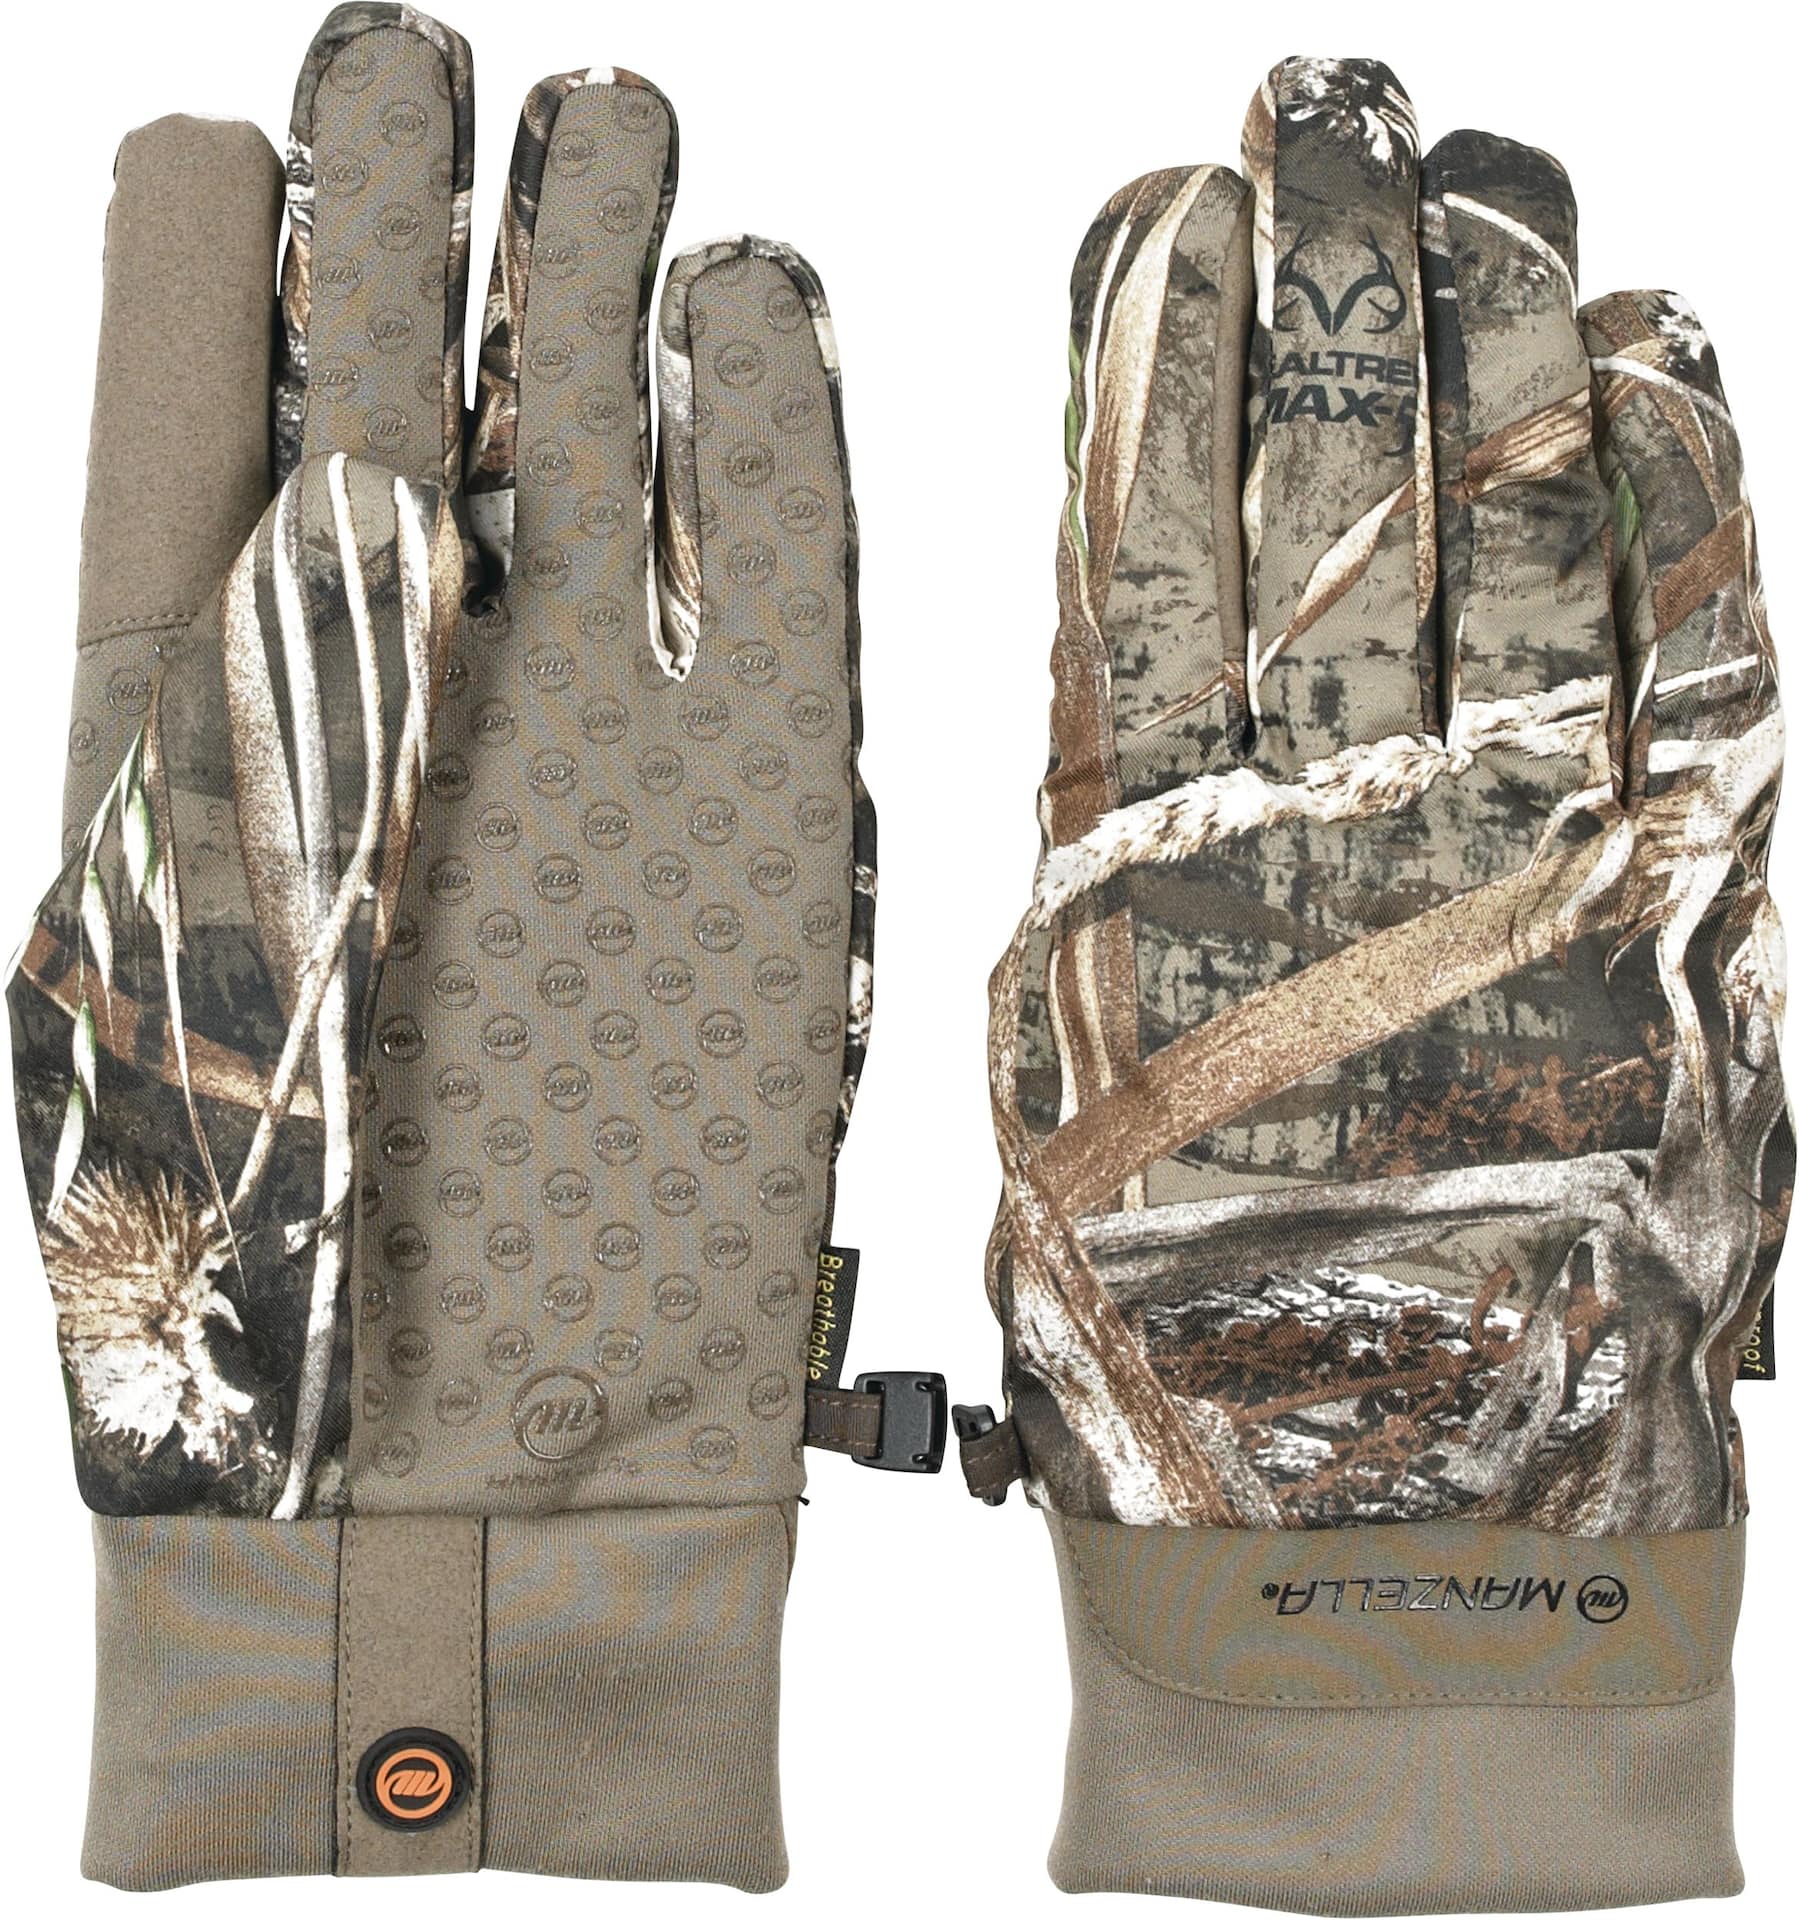 https://media-www.canadiantire.ca/product/playing/hunting/hunting-apparel-footwear/1754355/manzella-waterfowl-shooter-gloves-l-a824048e-4510-46bd-bde3-88affcde3645-jpgrendition.jpg